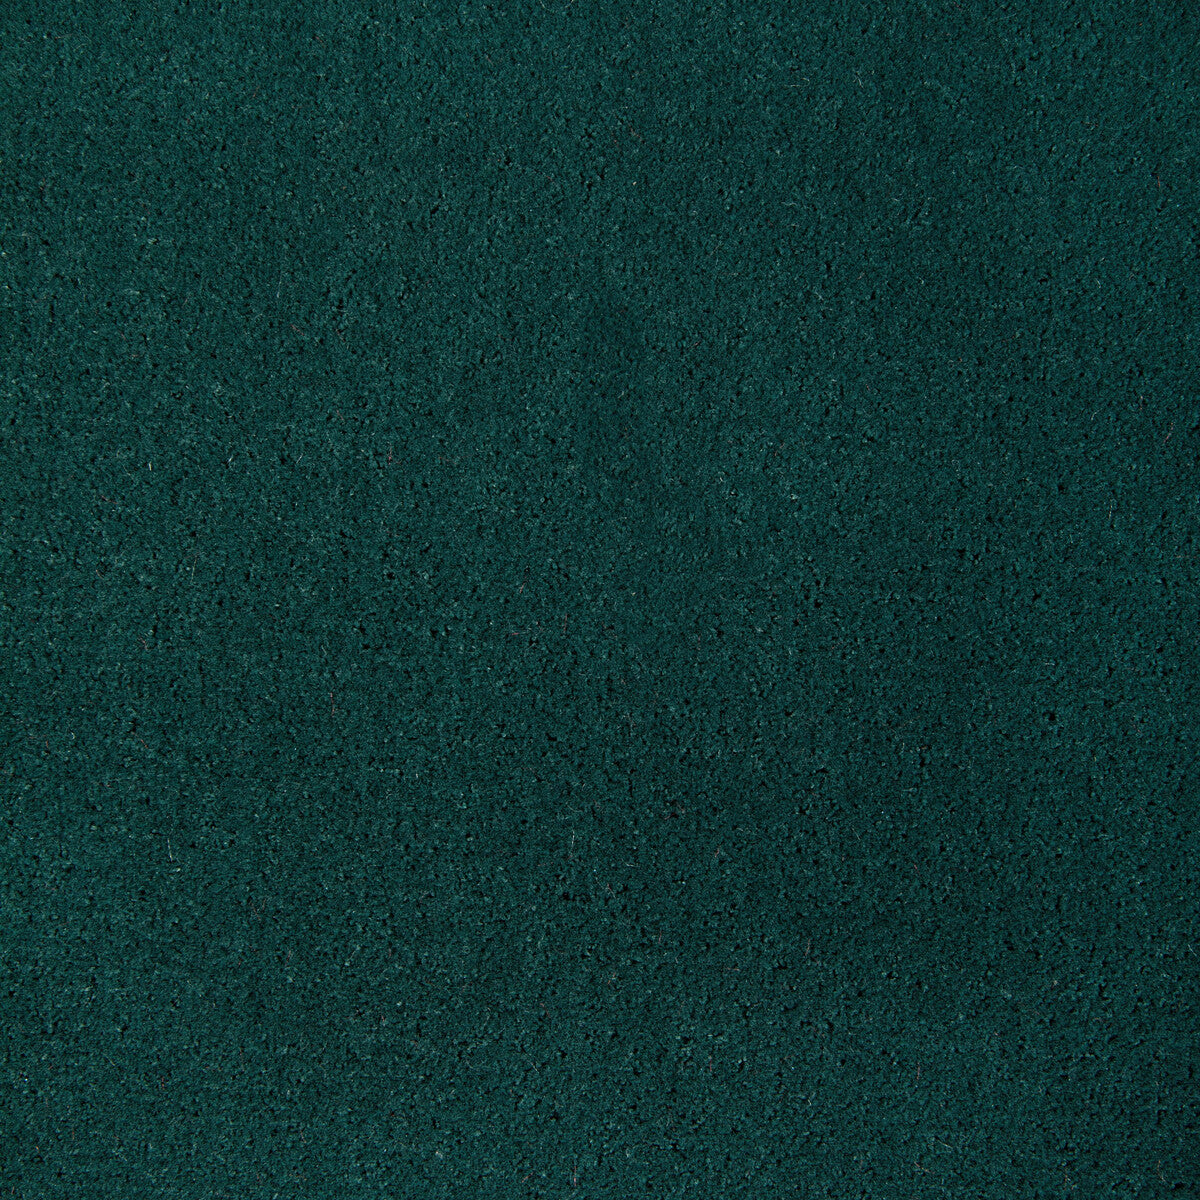 Fomo fabric in jade color - pattern 36543.303.0 - by Kravet Contract